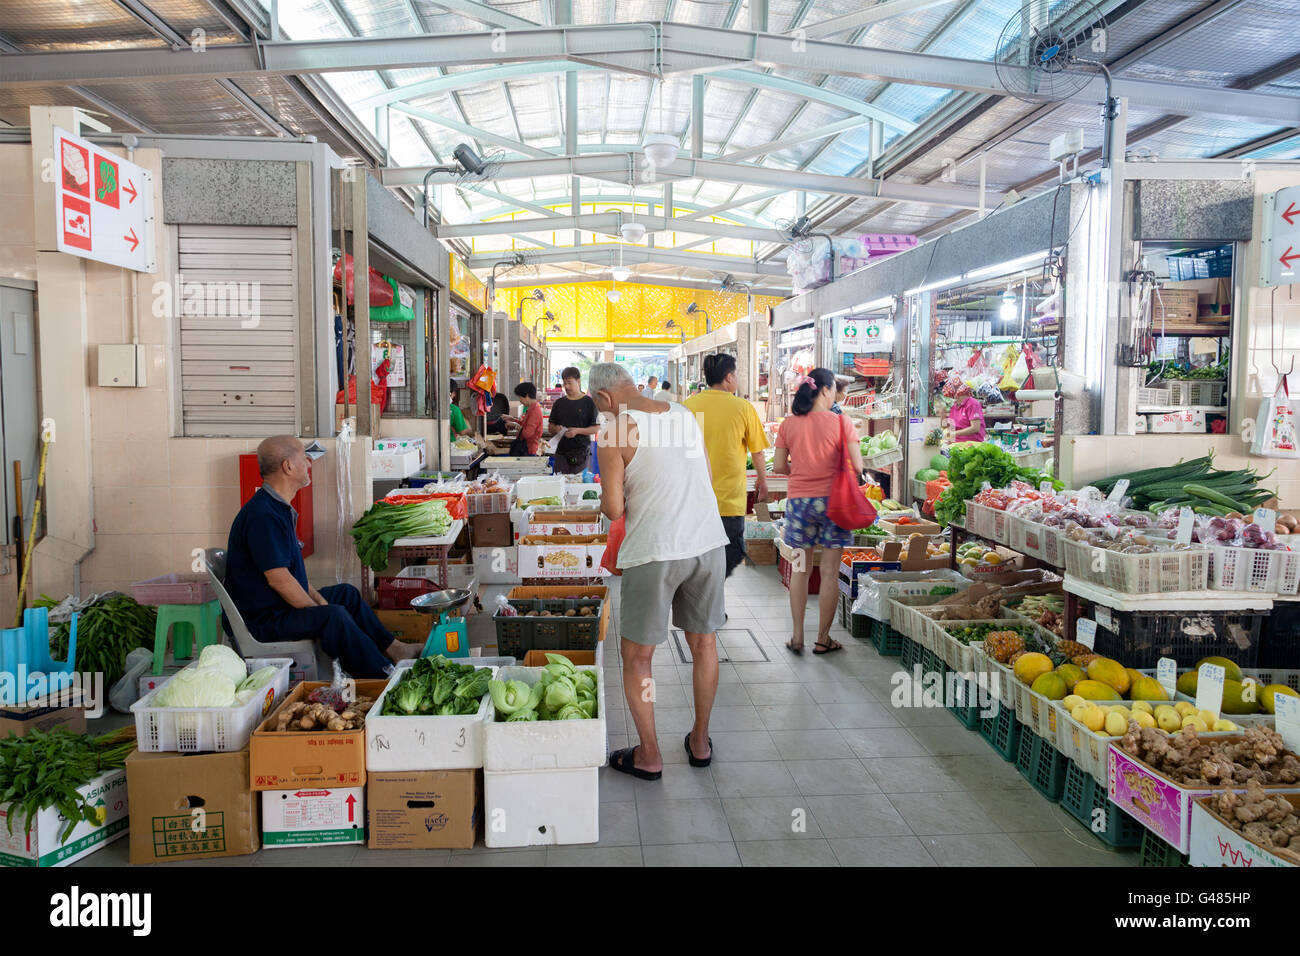 Singapore, Singapore - December 11, 2014: Local residents shopping for fruits and vegetables at a local wet market in Singapore. Stock Photo